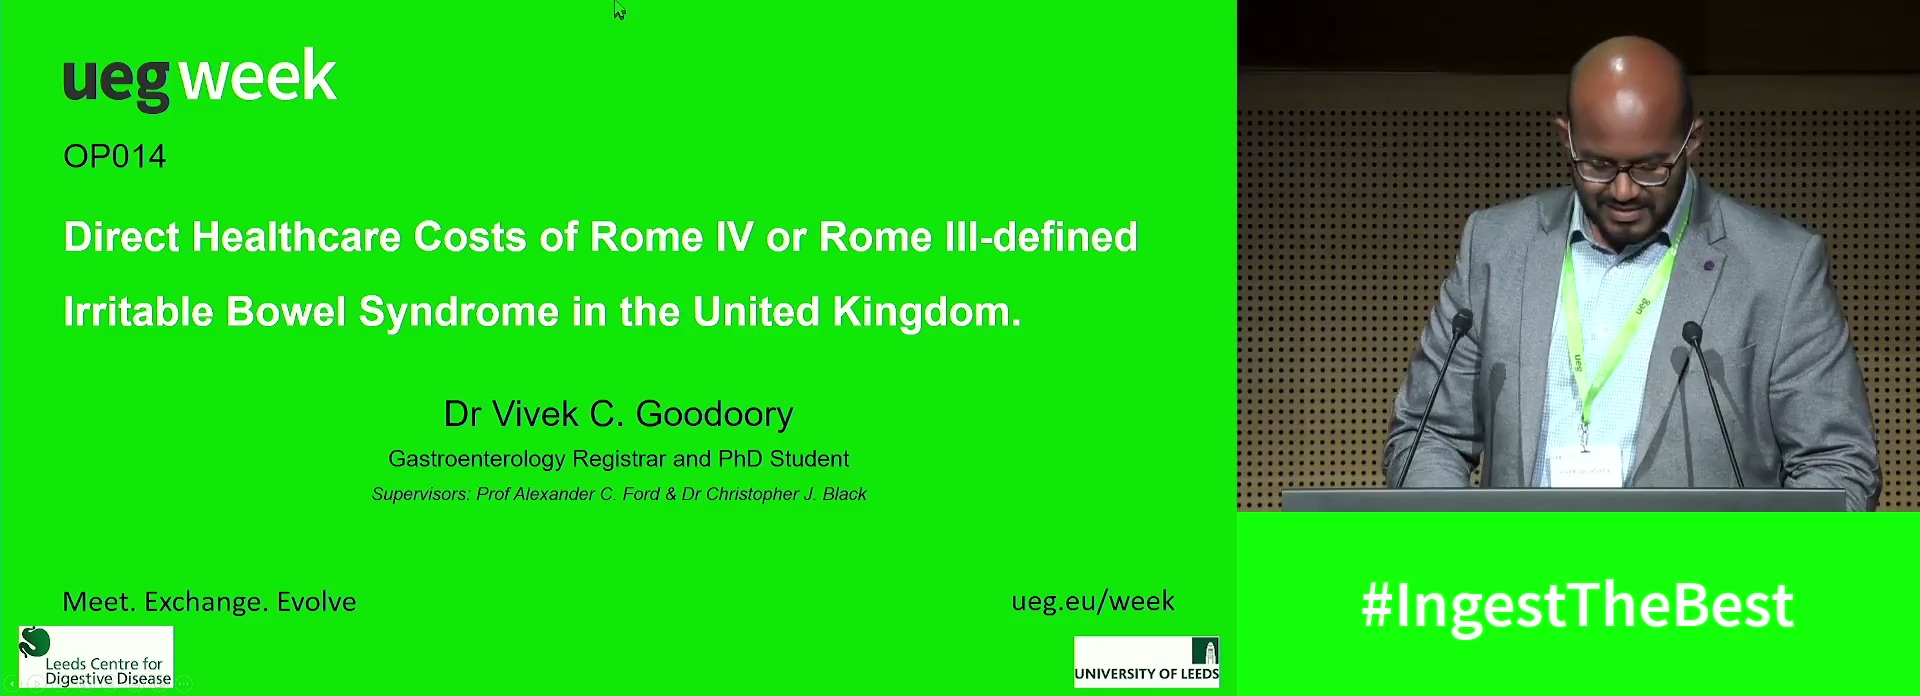 DIRECT HEALTHCARE COSTS OF ROME IV OR ROME III-DEFINED IRRITABLE BOWEL SYNDROME IN THE UNITED KINGDOM